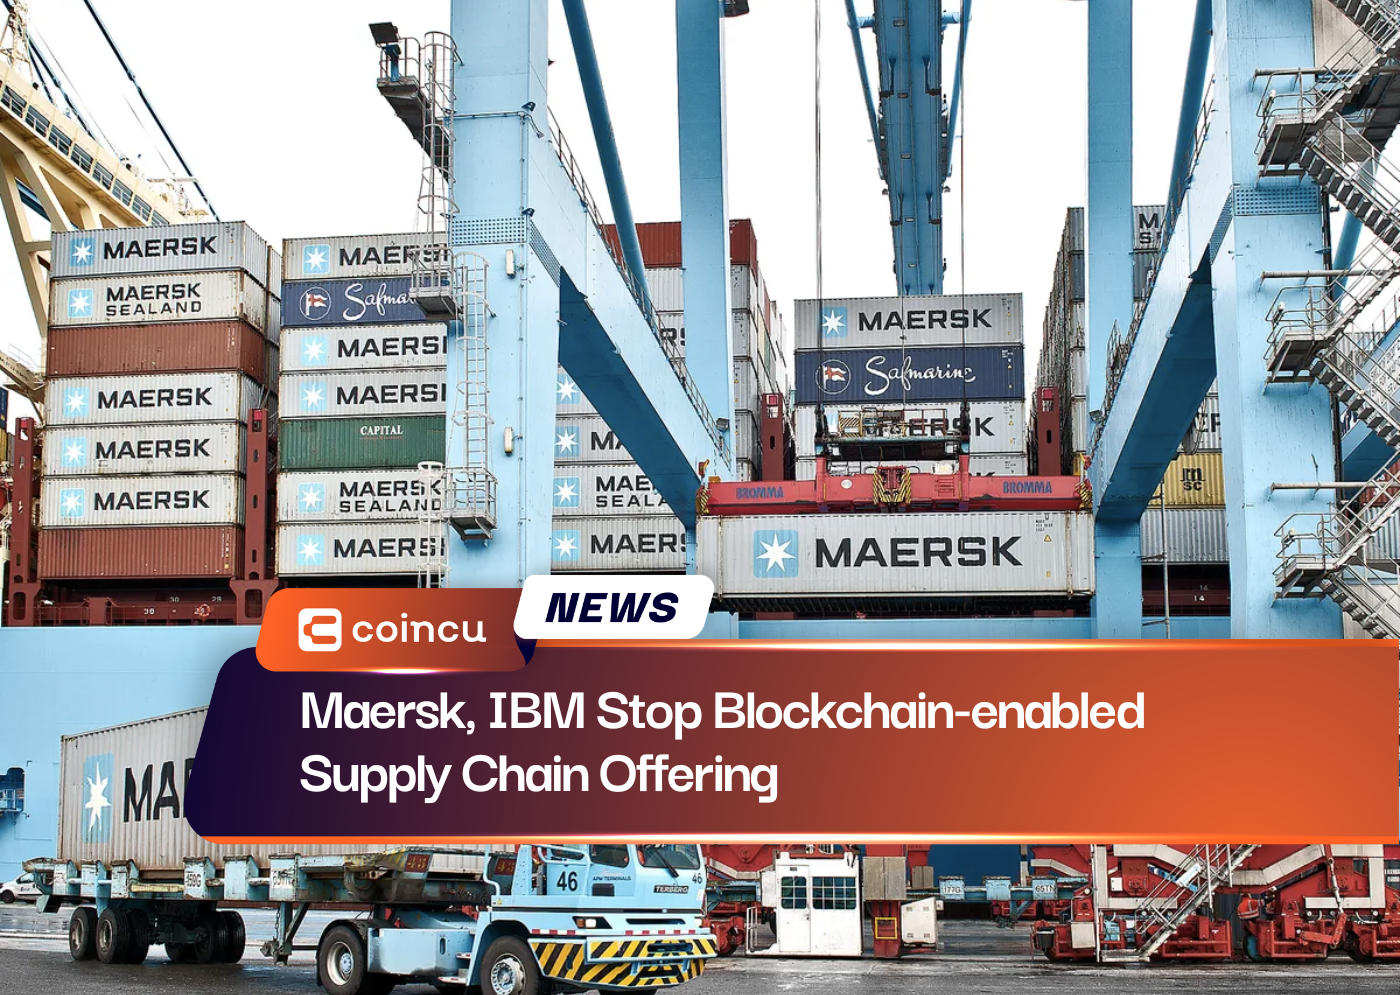 Maersk, IBM Stop Blockchain-enabled Supply Chain Offering